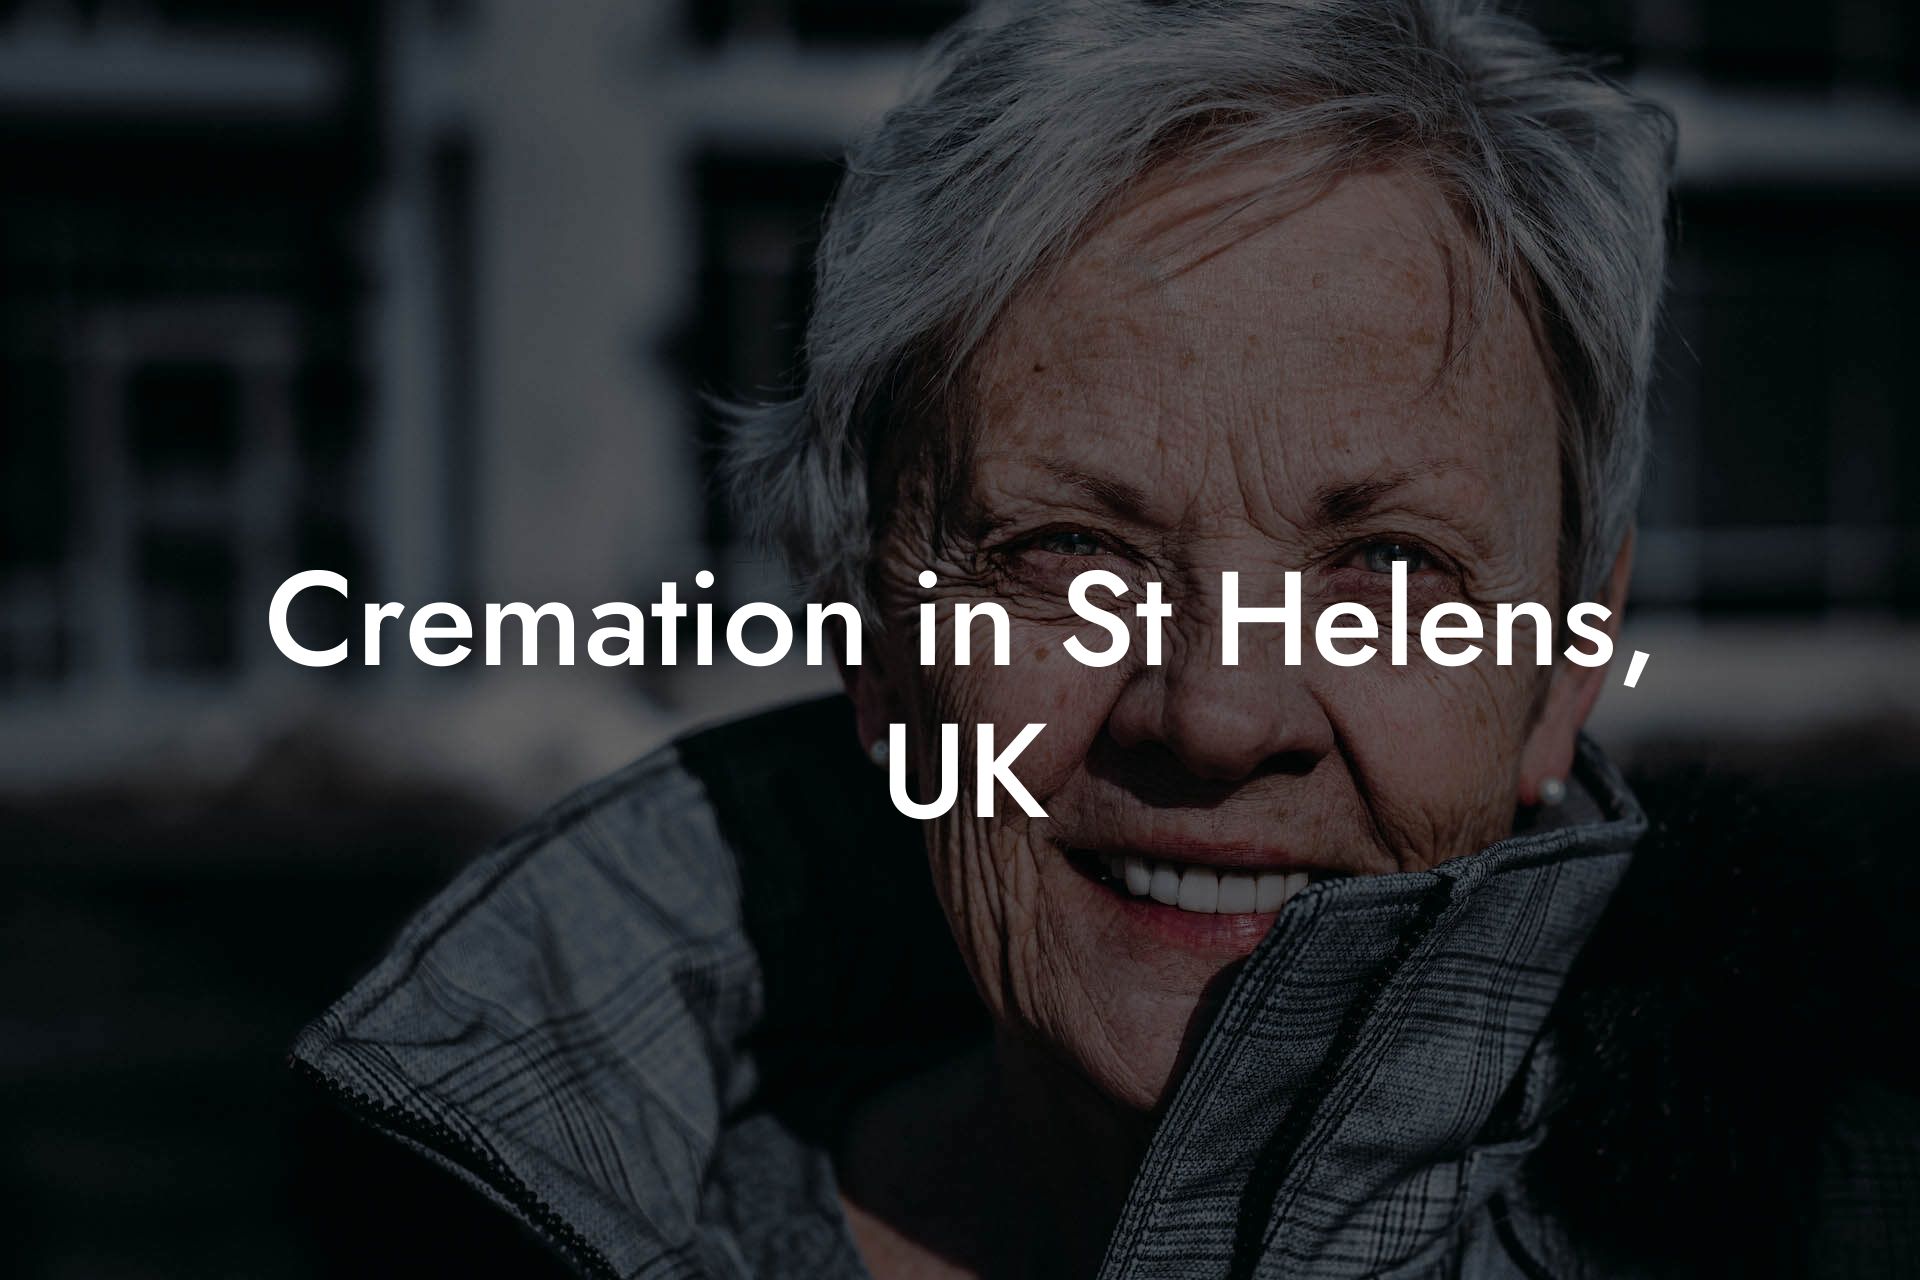 Cremation in St Helens, UK